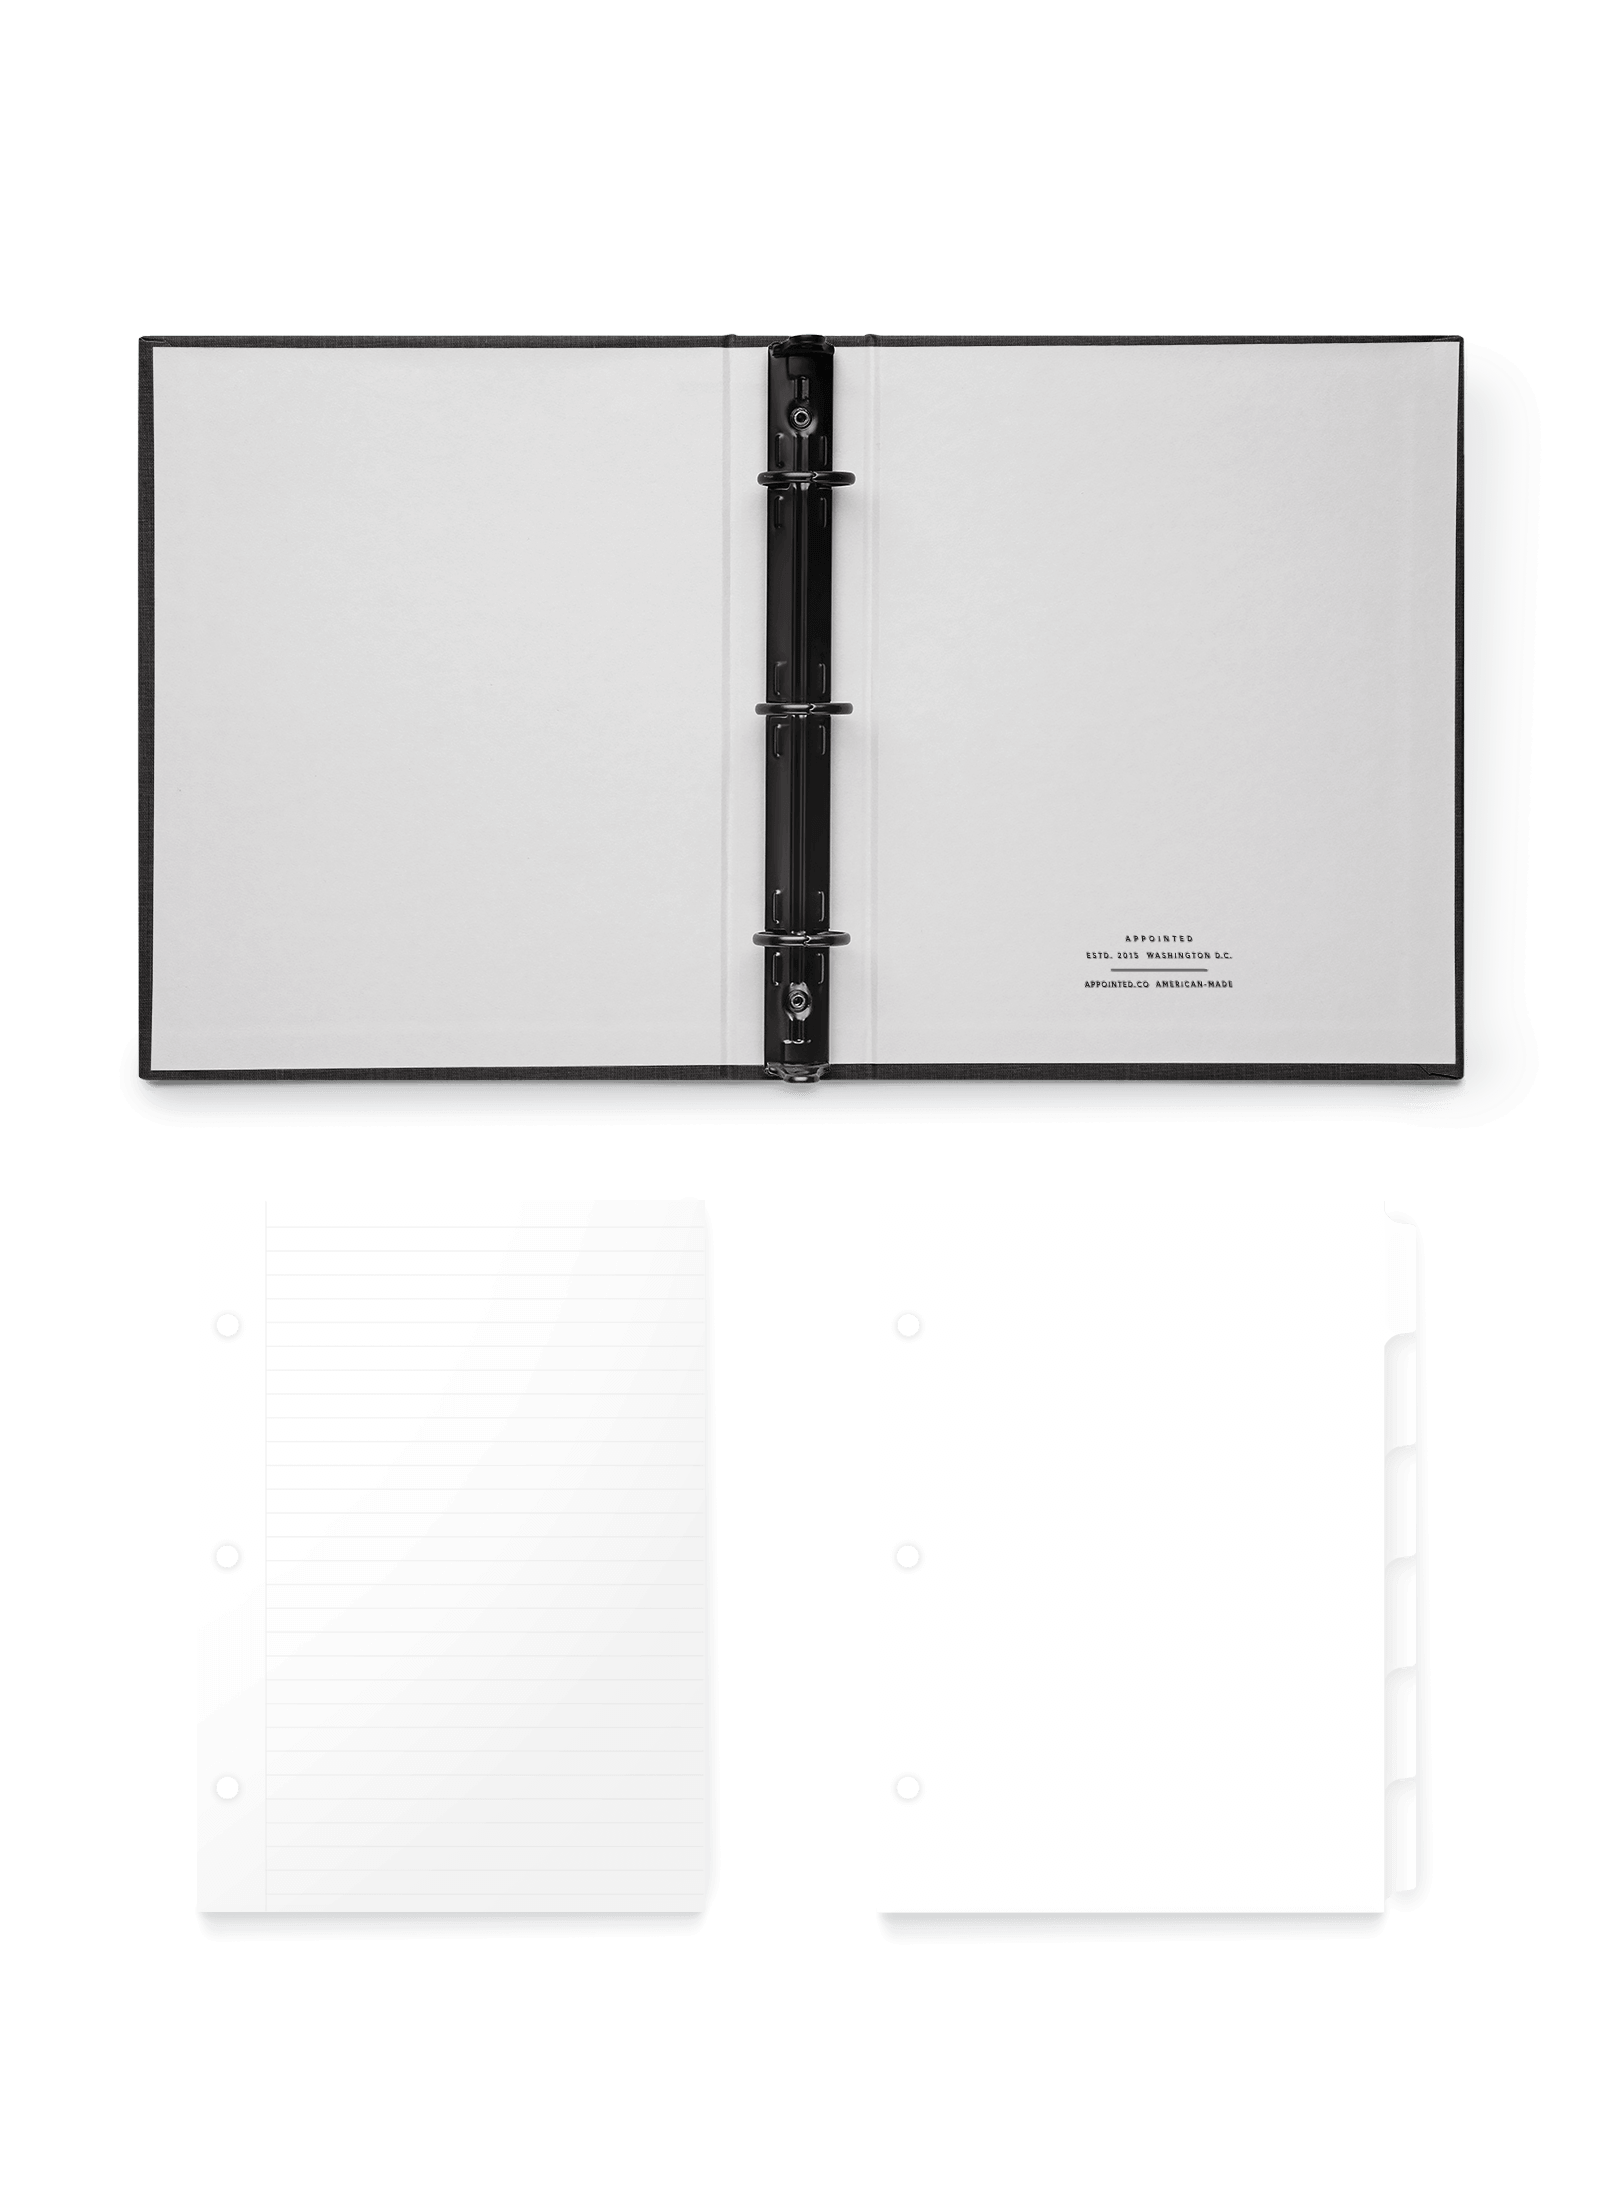 Artist Pad - Large Format Sketch & Drawing Pad - Appointed